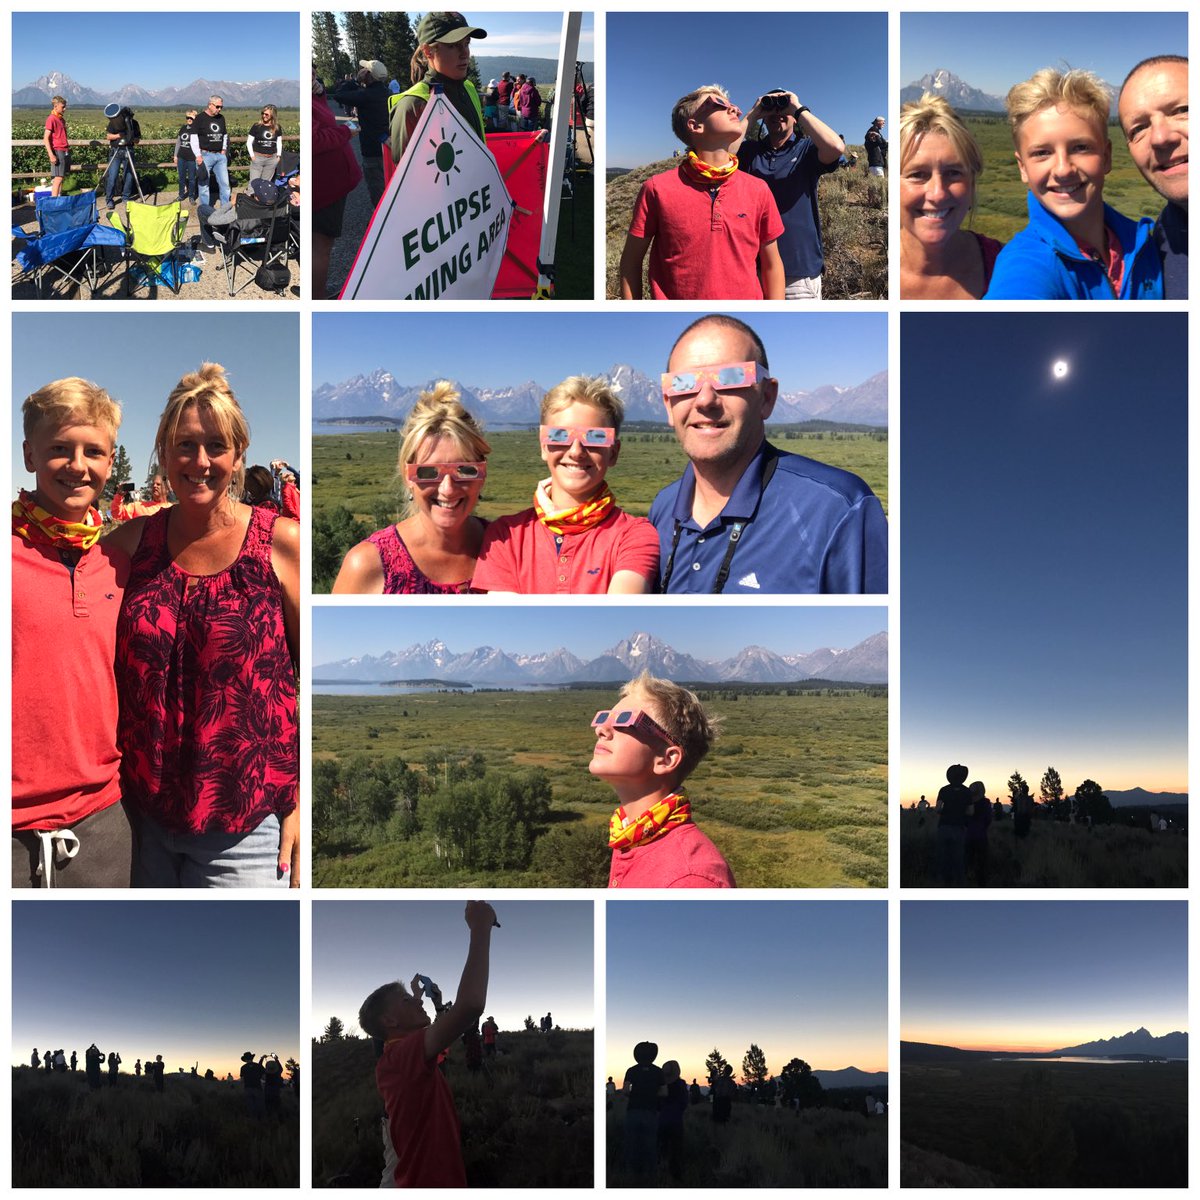 We were lucky enough to see the 2017 total eclipse in Grand Teton National Park. The eerie silence still sends a shiver. Nature is simply spectacular #Eclipse2024